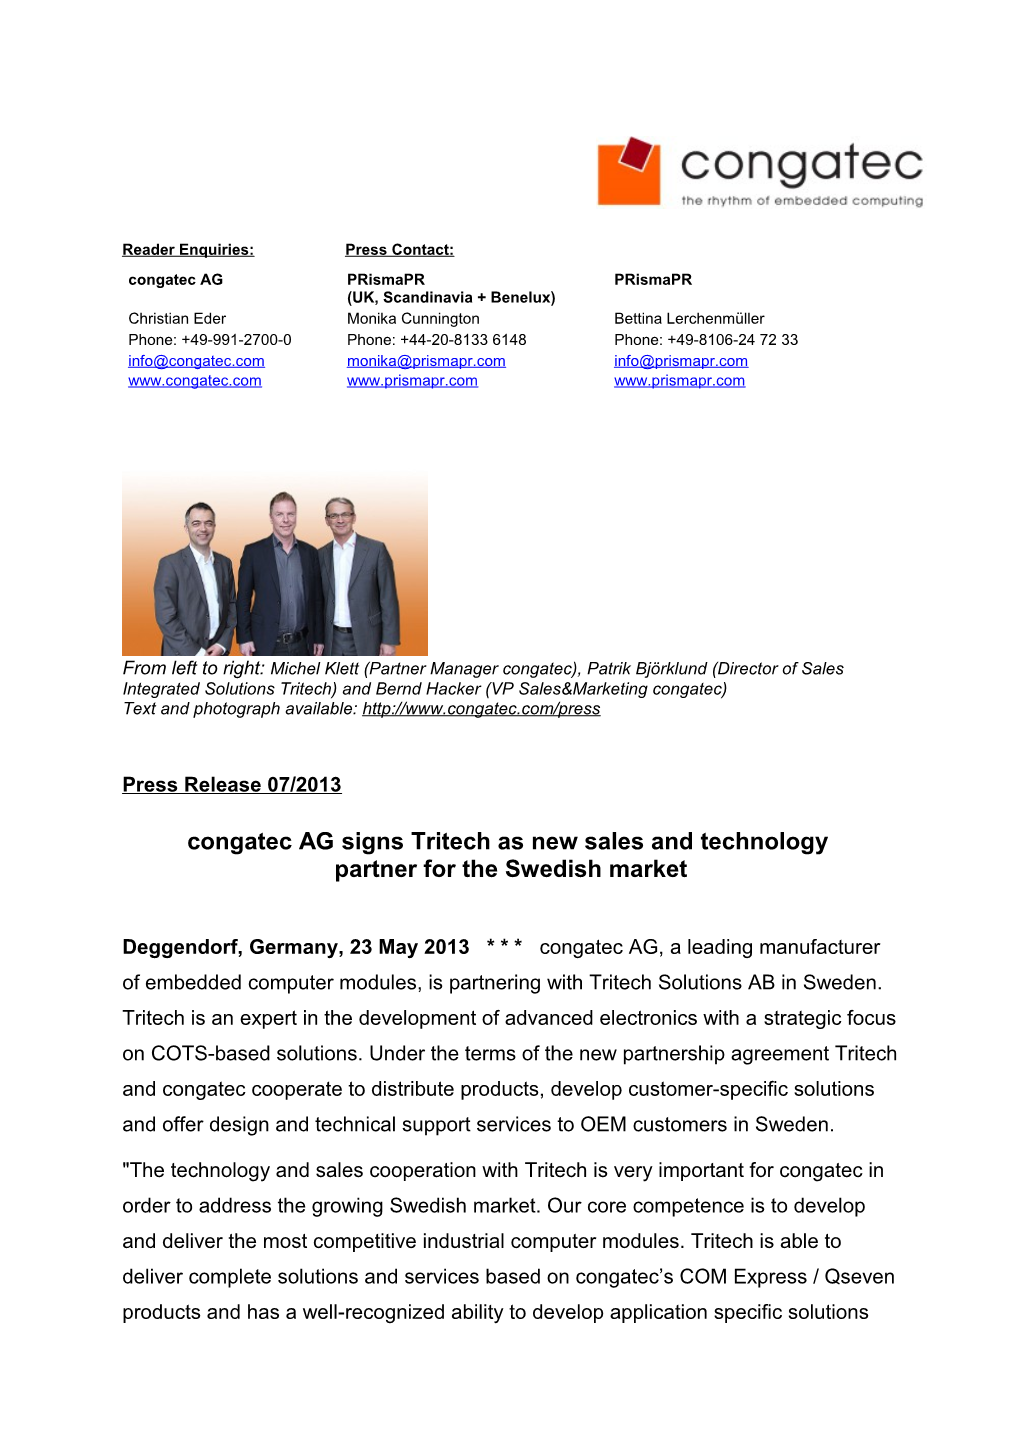 Congatec Signs Tritech As Sales and Technology Partner for Sweden